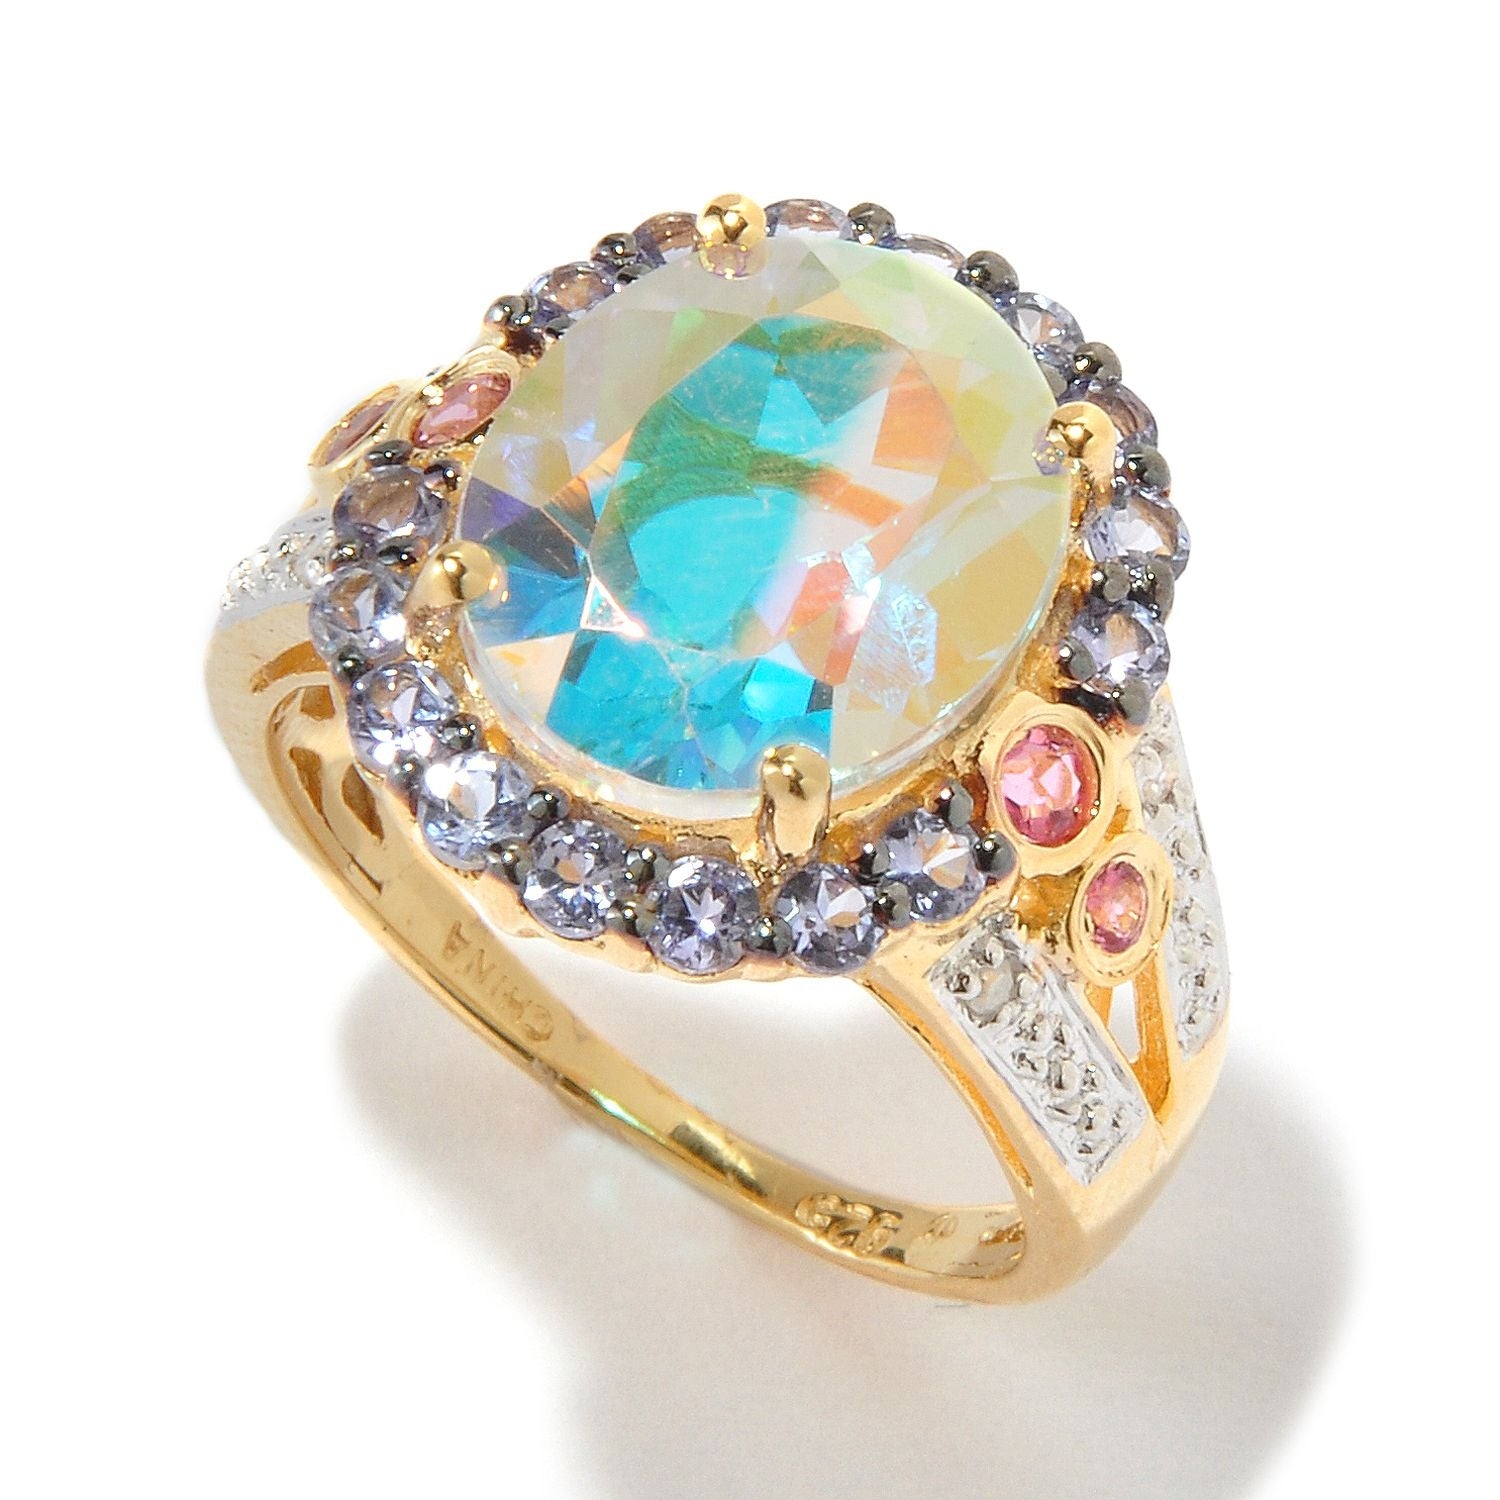 Pinctore 18K Yellow Gold Over Silver 6.55ctw Opal Topaz Cocktail Ring - pinctore